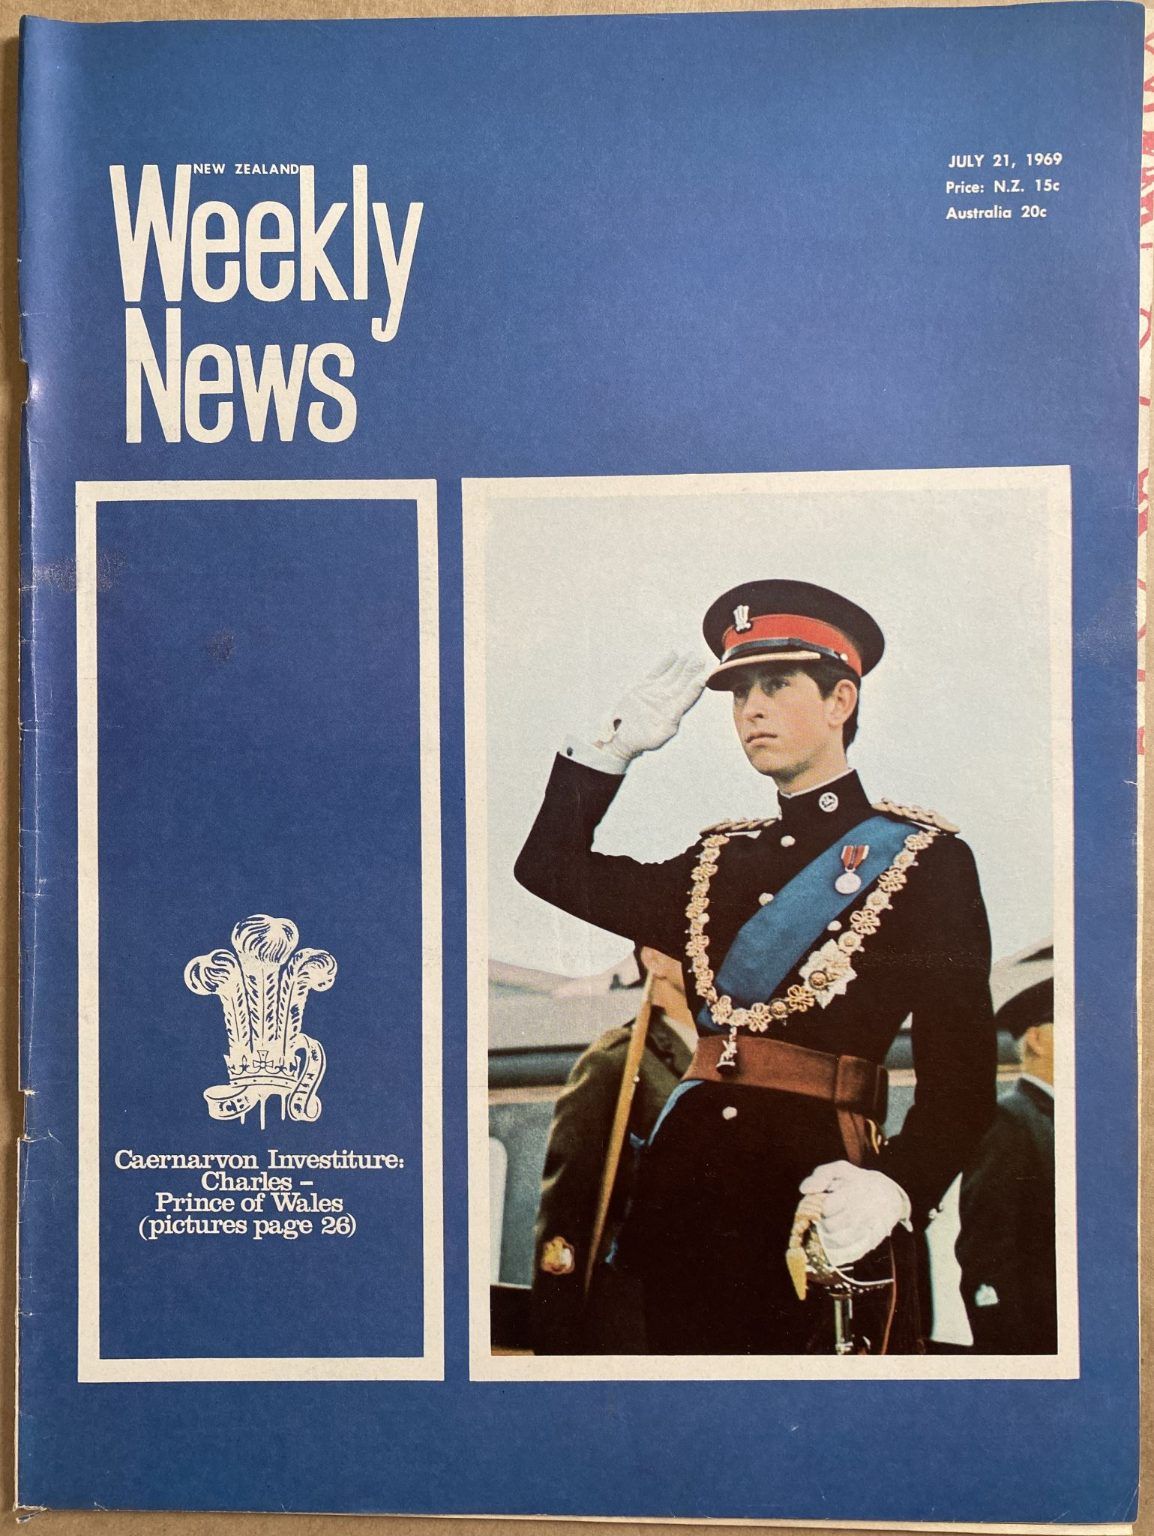 OLD NEWSPAPER: New Zealand Weekly News, No. 5512, 21 July 1969